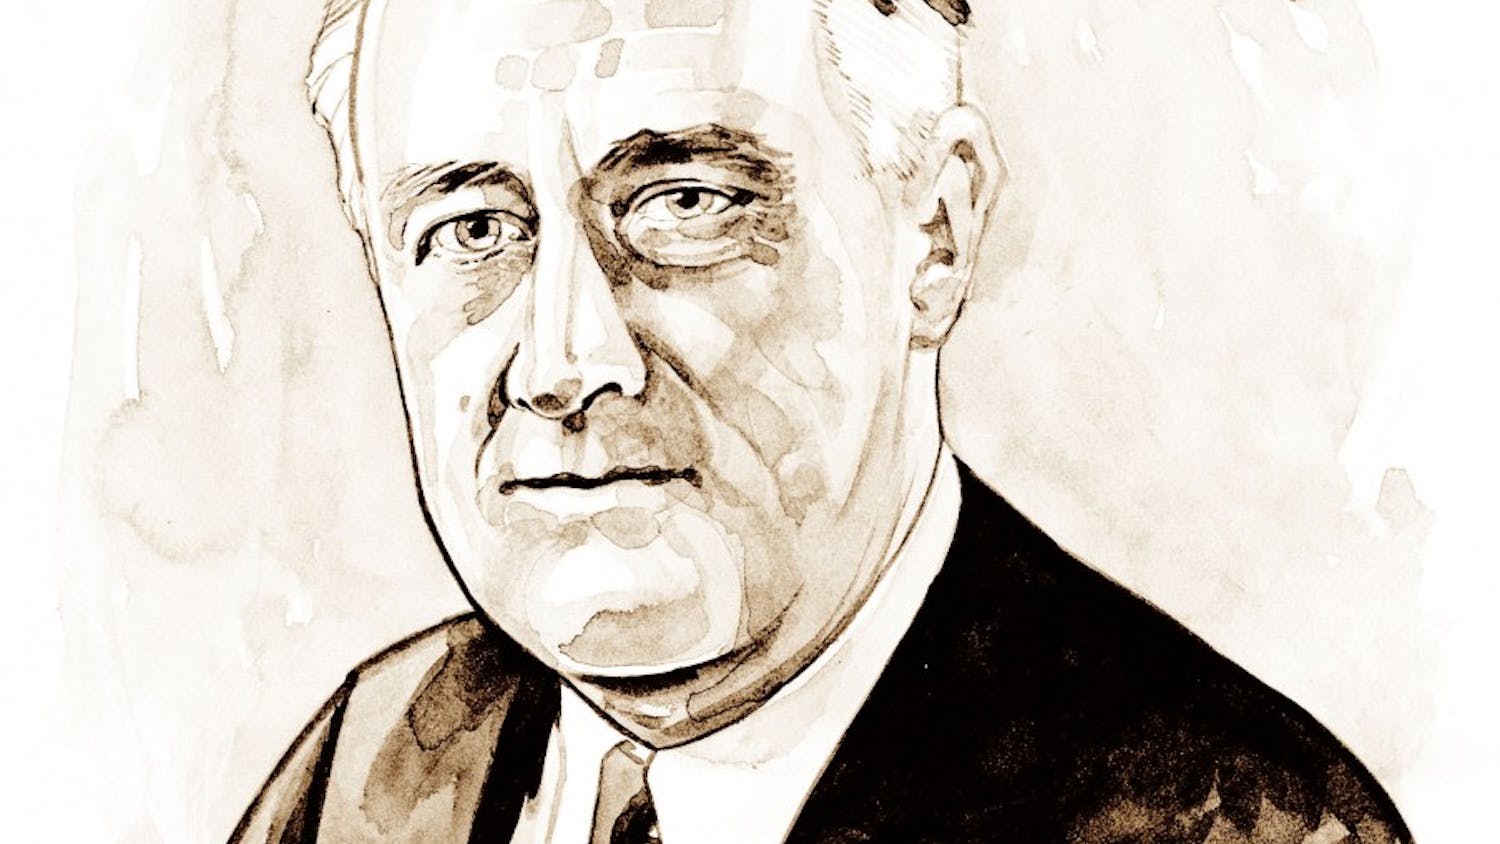 300 dpi Rick Tuma portrait of Franklin Delano Roosevelt, a U.S. president. Chicago Tribune 2013

franklin delano roosevelt franklin roosevelt fdr; krtnational national; krt; krtcampus campus; mctillustration; 01028000; ACE; krtculture culture; krthistory history; 11000000; 11006004; 11006005; 11006006; defense; executive branch; head of state; krtgovernment government; krtpolitics politics; krtuspolitics; national government; POL; tb contributed; krtnamer north america; u.s. us united states; USA; 10011000; FEA; krtfeatures features; krtholiday holiday; krtlifestyle lifestyle; krtpresday president's day presidents; krtwinter winter; LEI; leisure; LIF; public holiday; presidency president; tuma; 2013; krt2013